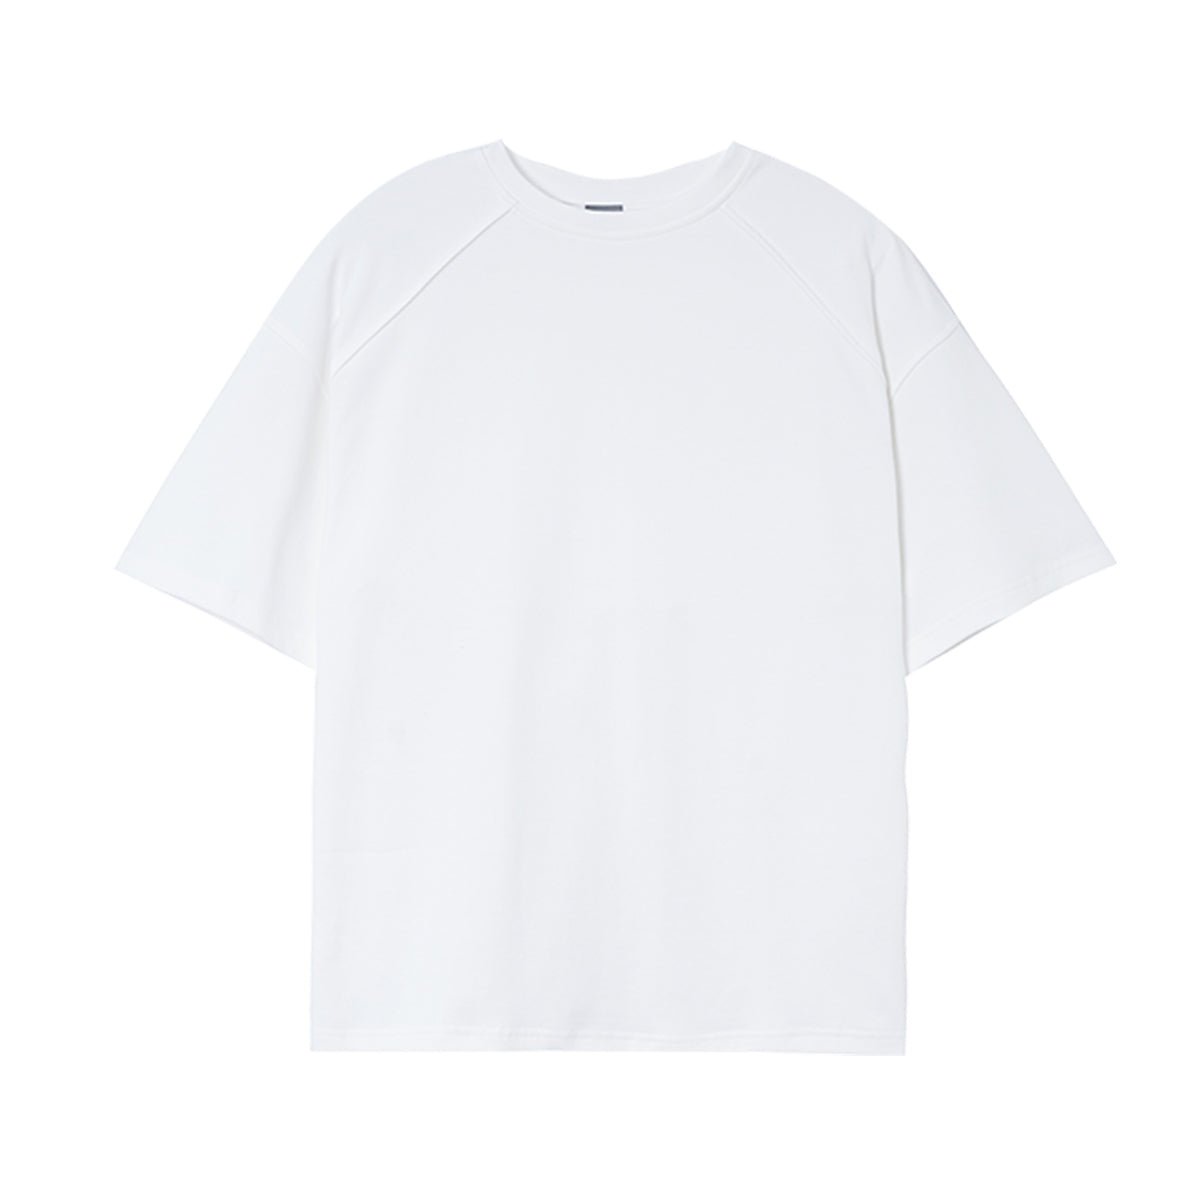 Urban Oversized Wide Batwing White Tee - 0cm